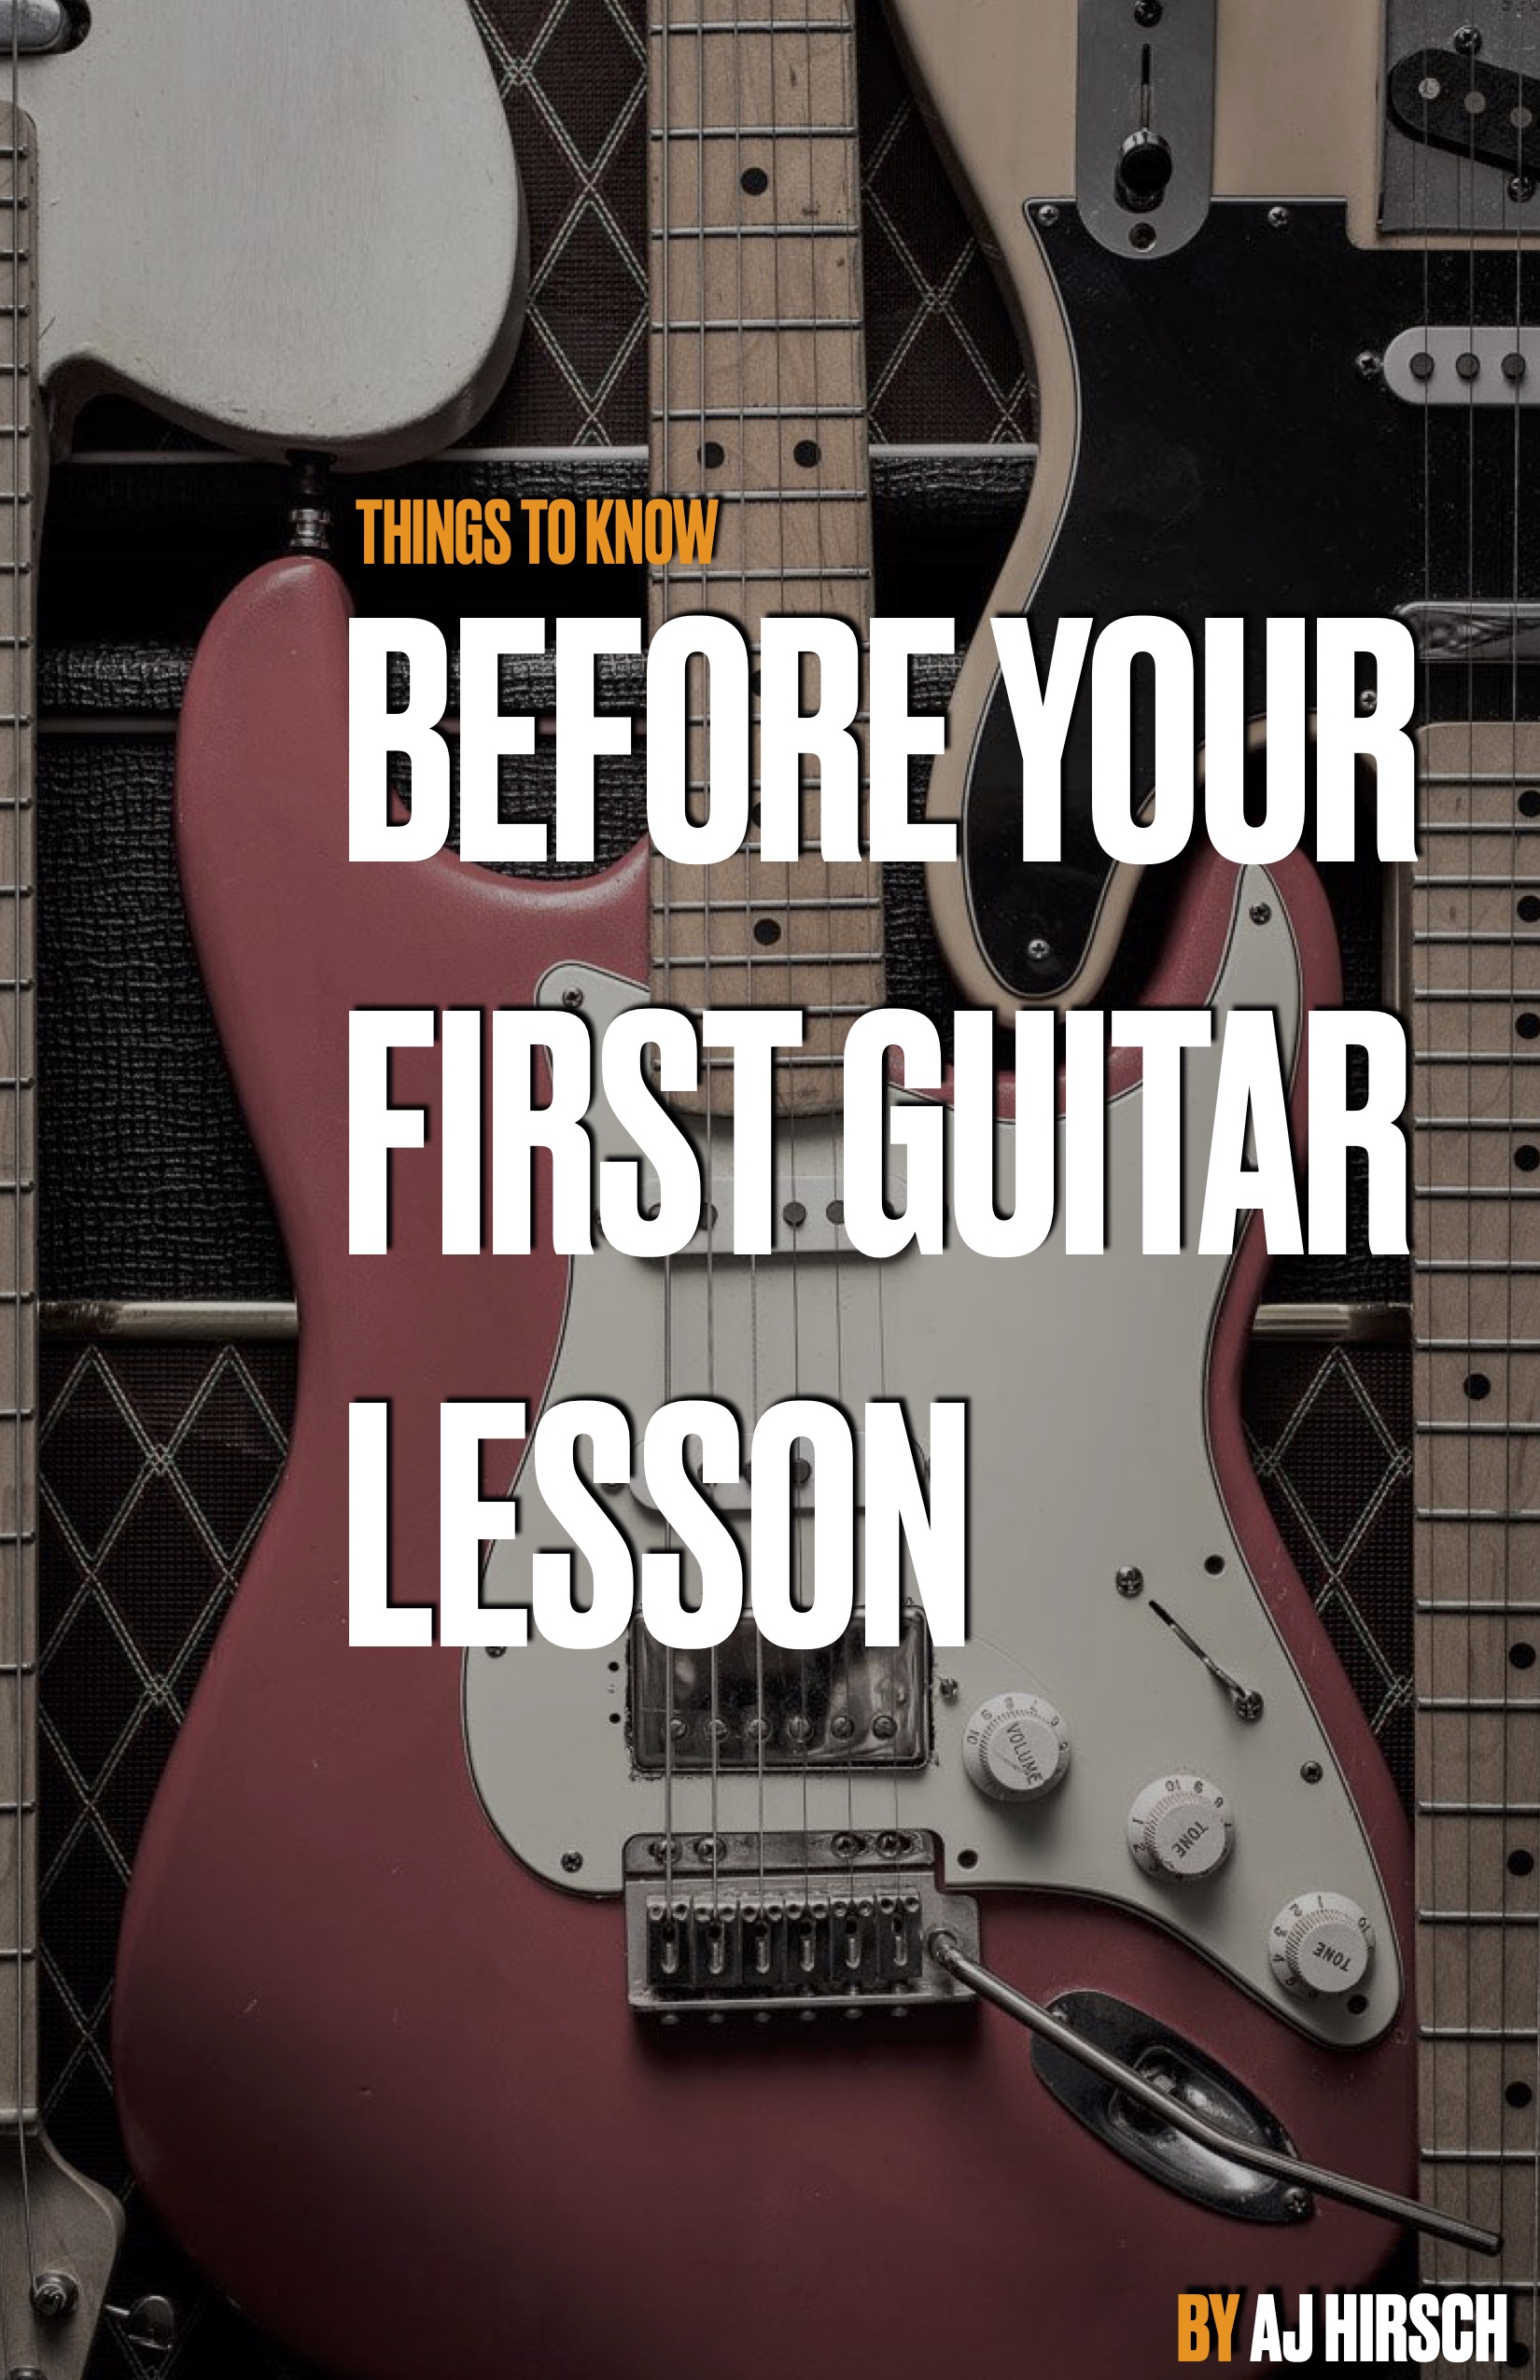 Cover image of a red fender stratocaster and a yellow and white fender telecaster, along with a vox ac30 and ac15 amplifier used as the cover for the "Things to know before your first guitar lesson" blog.